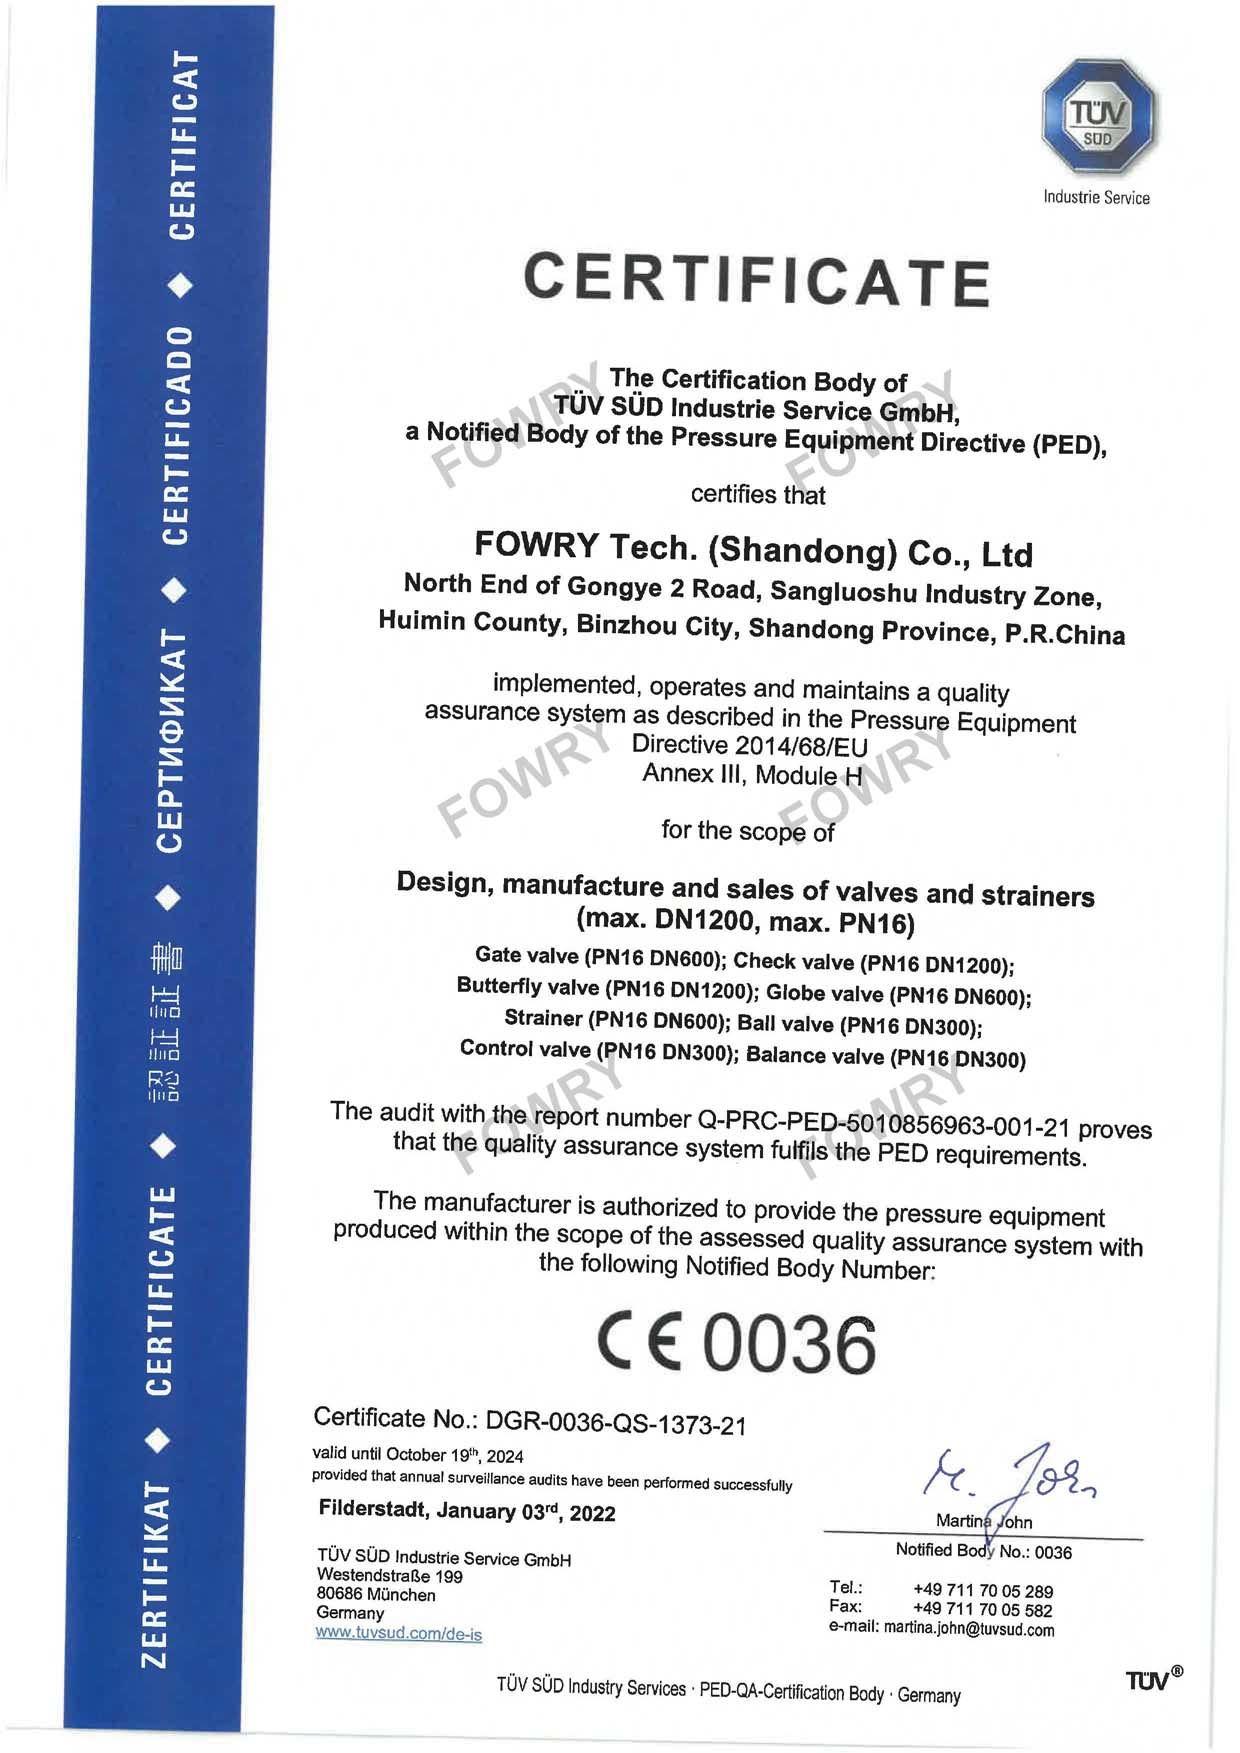 FOWRY PED H Product Certificate